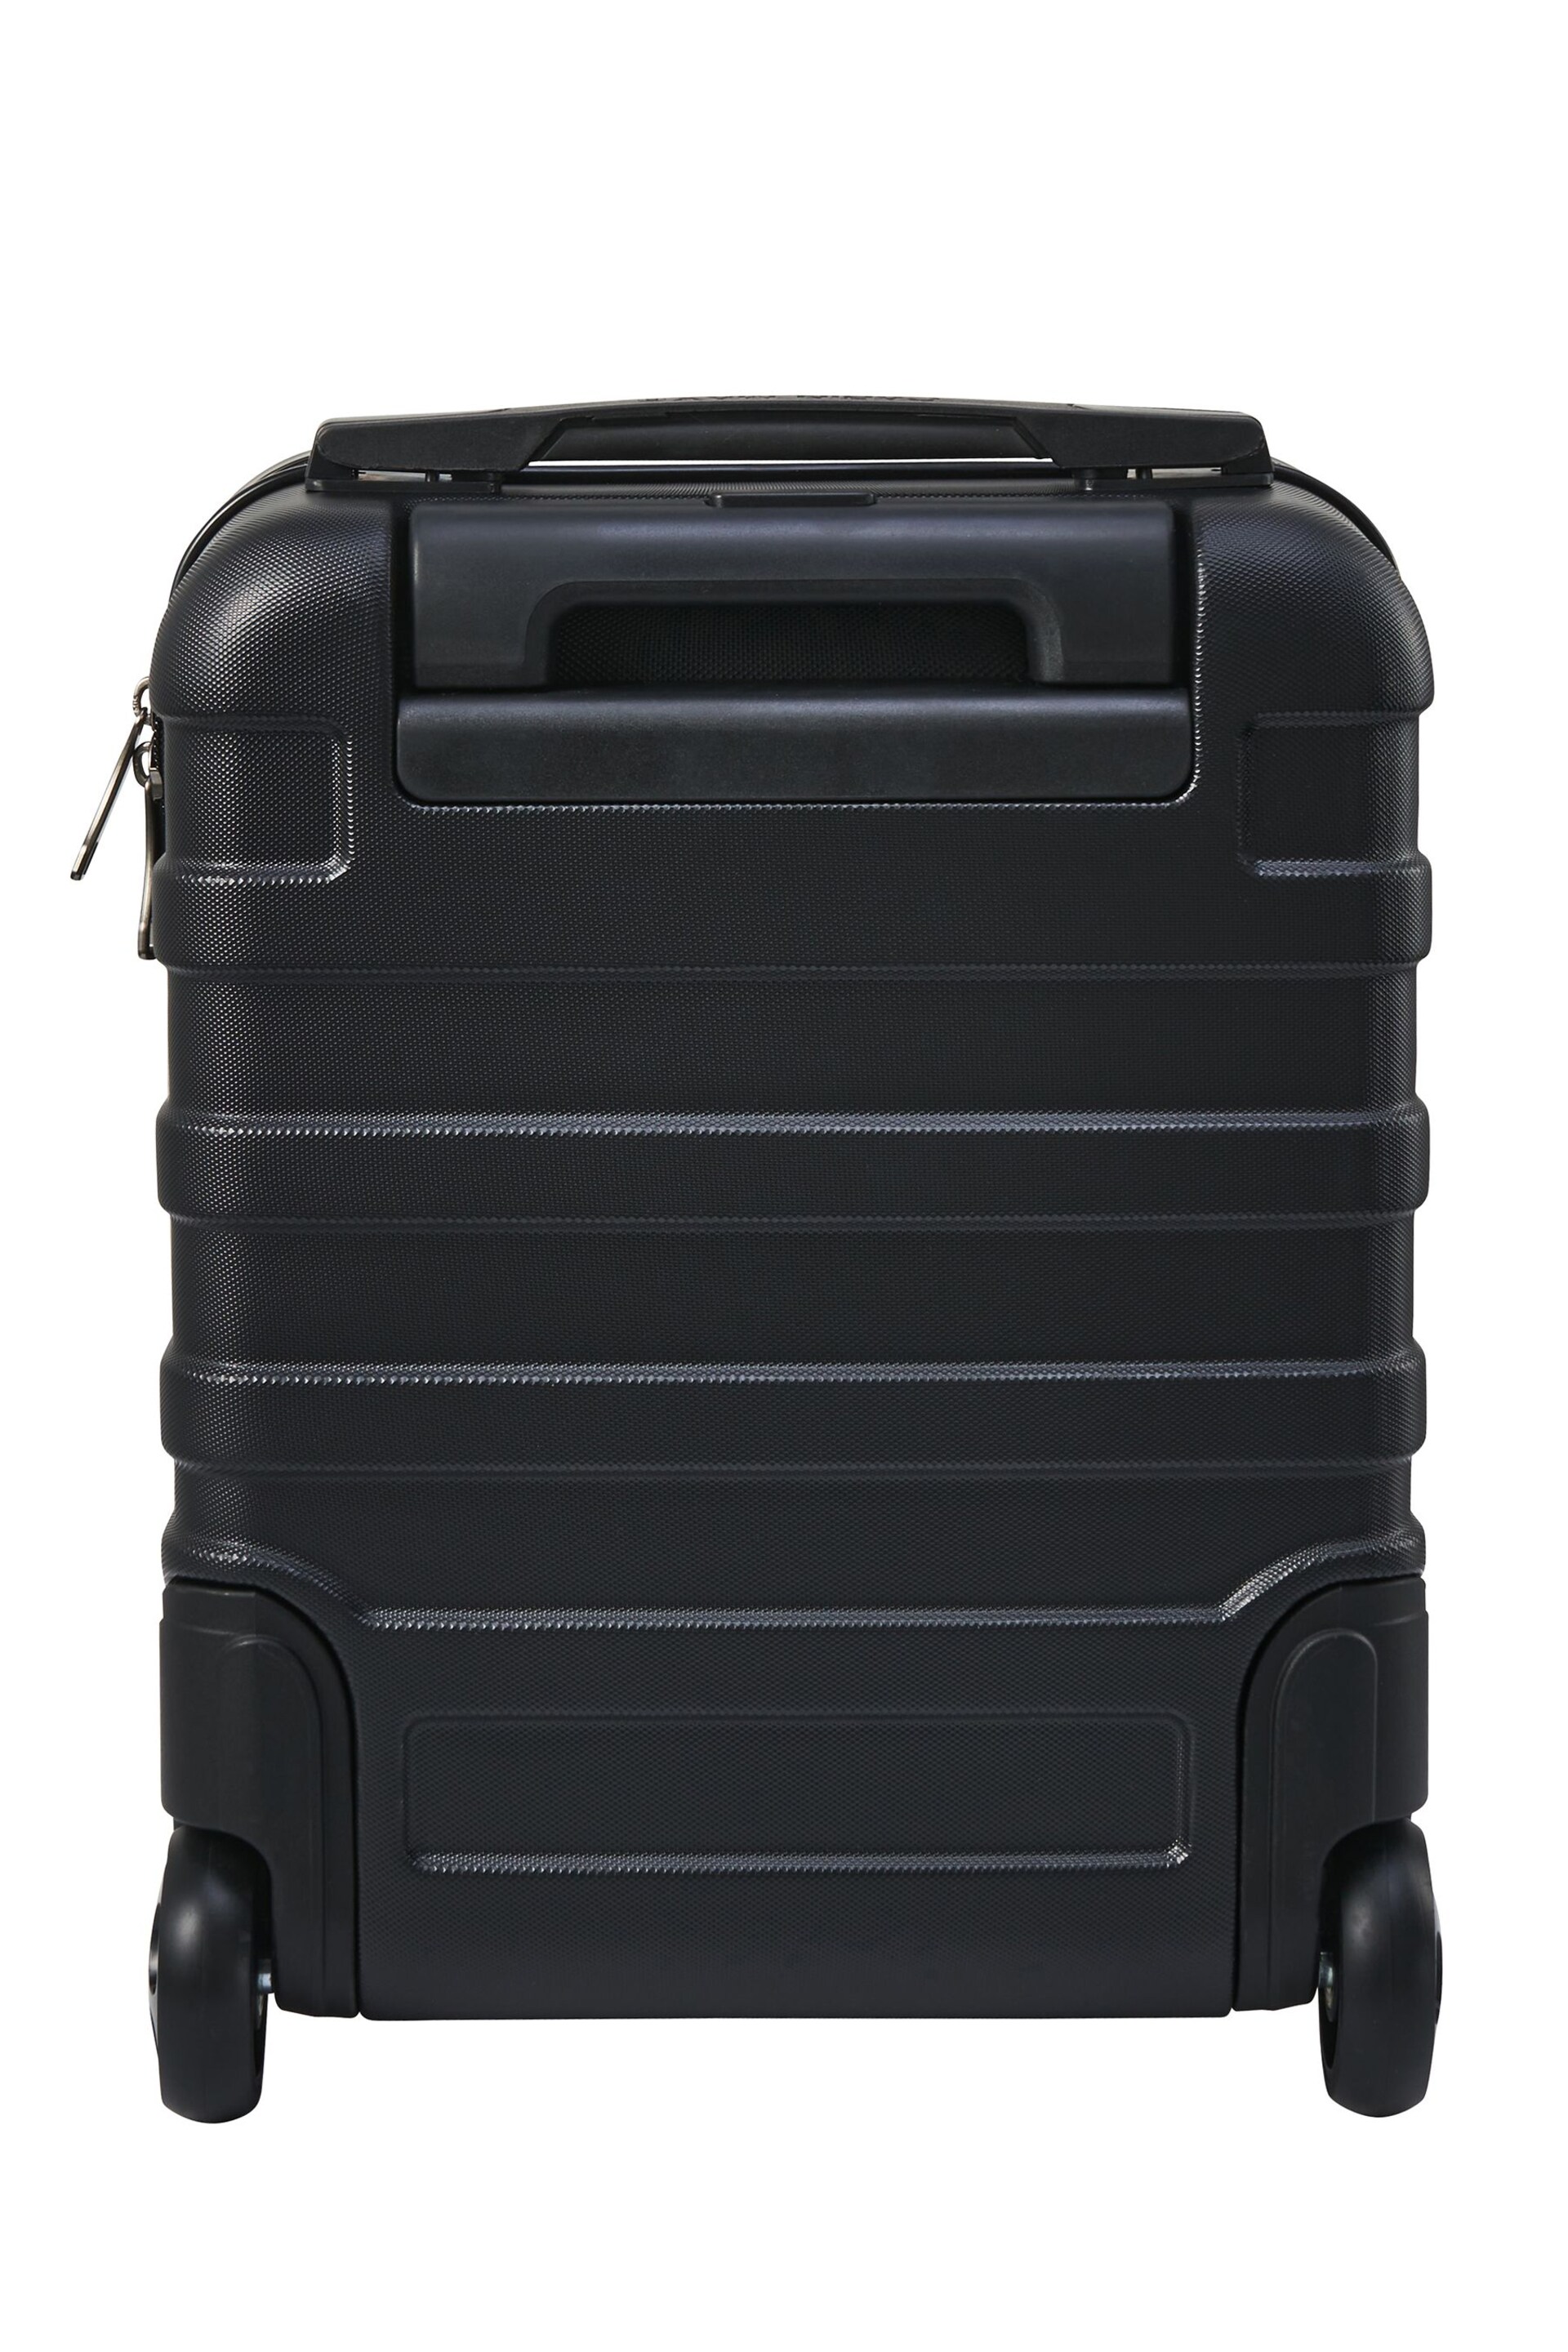 Cabin Max Anode Two Wheel Carry On Underseat 45cm Suitcase - Image 3 of 3